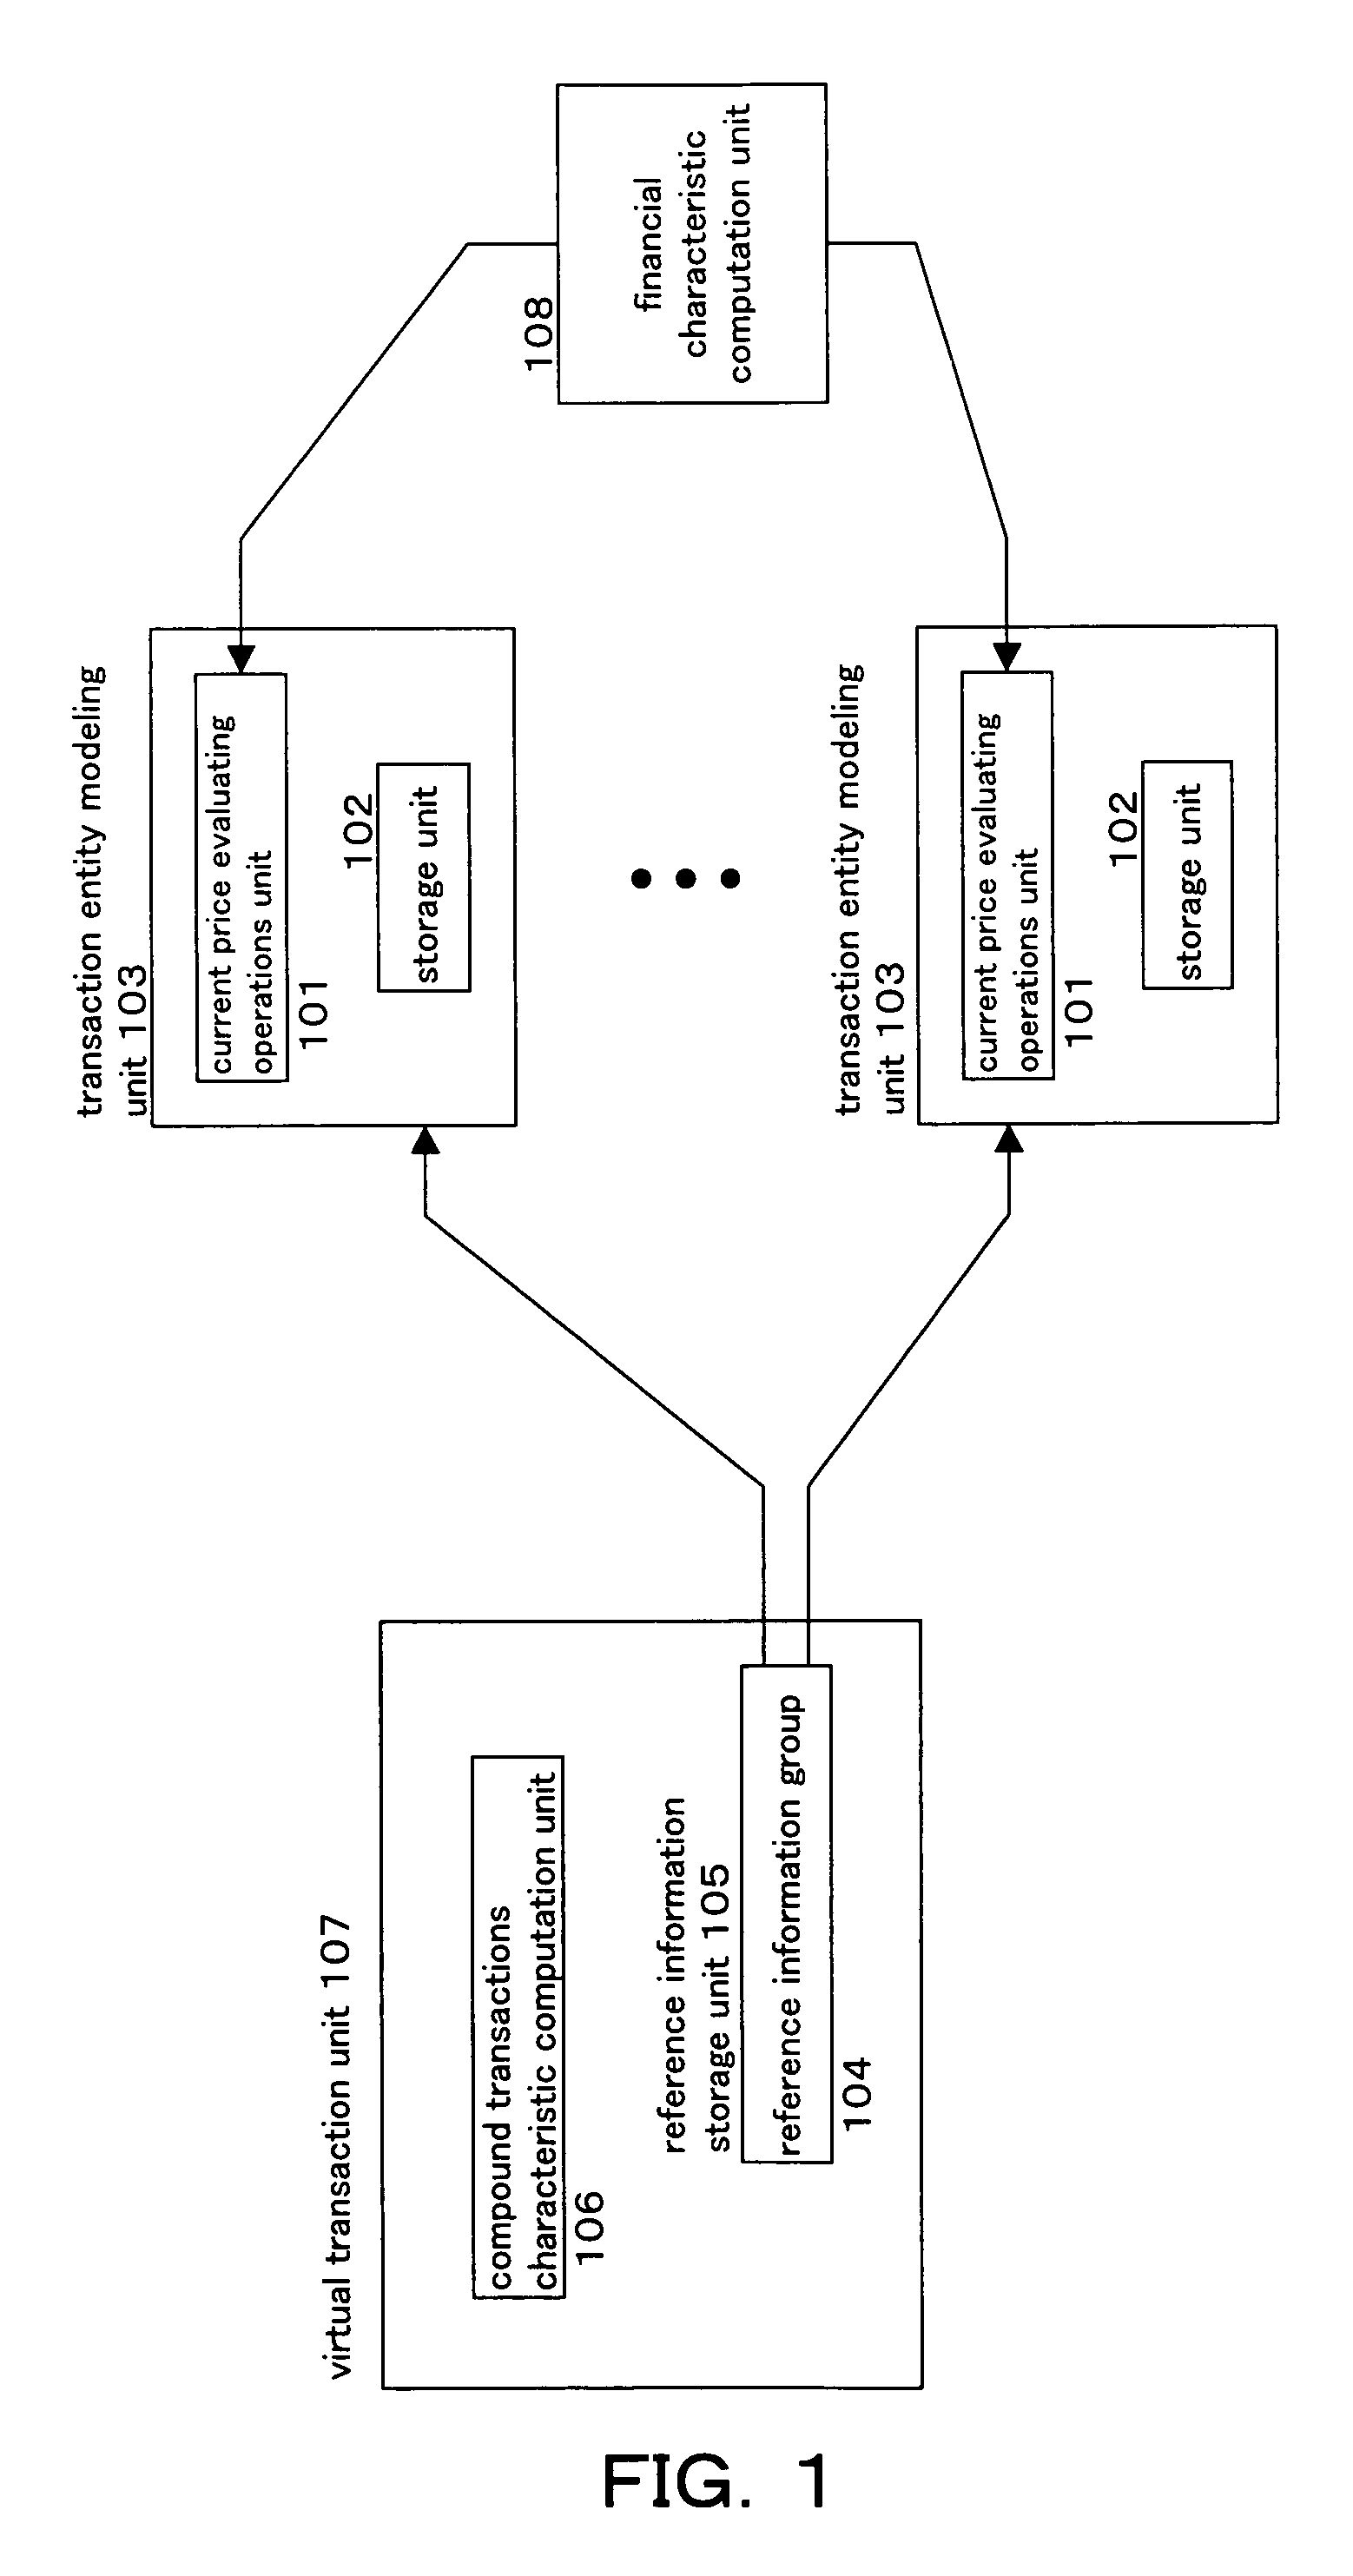 Integrated finance risk manager and financial transaction modeling device